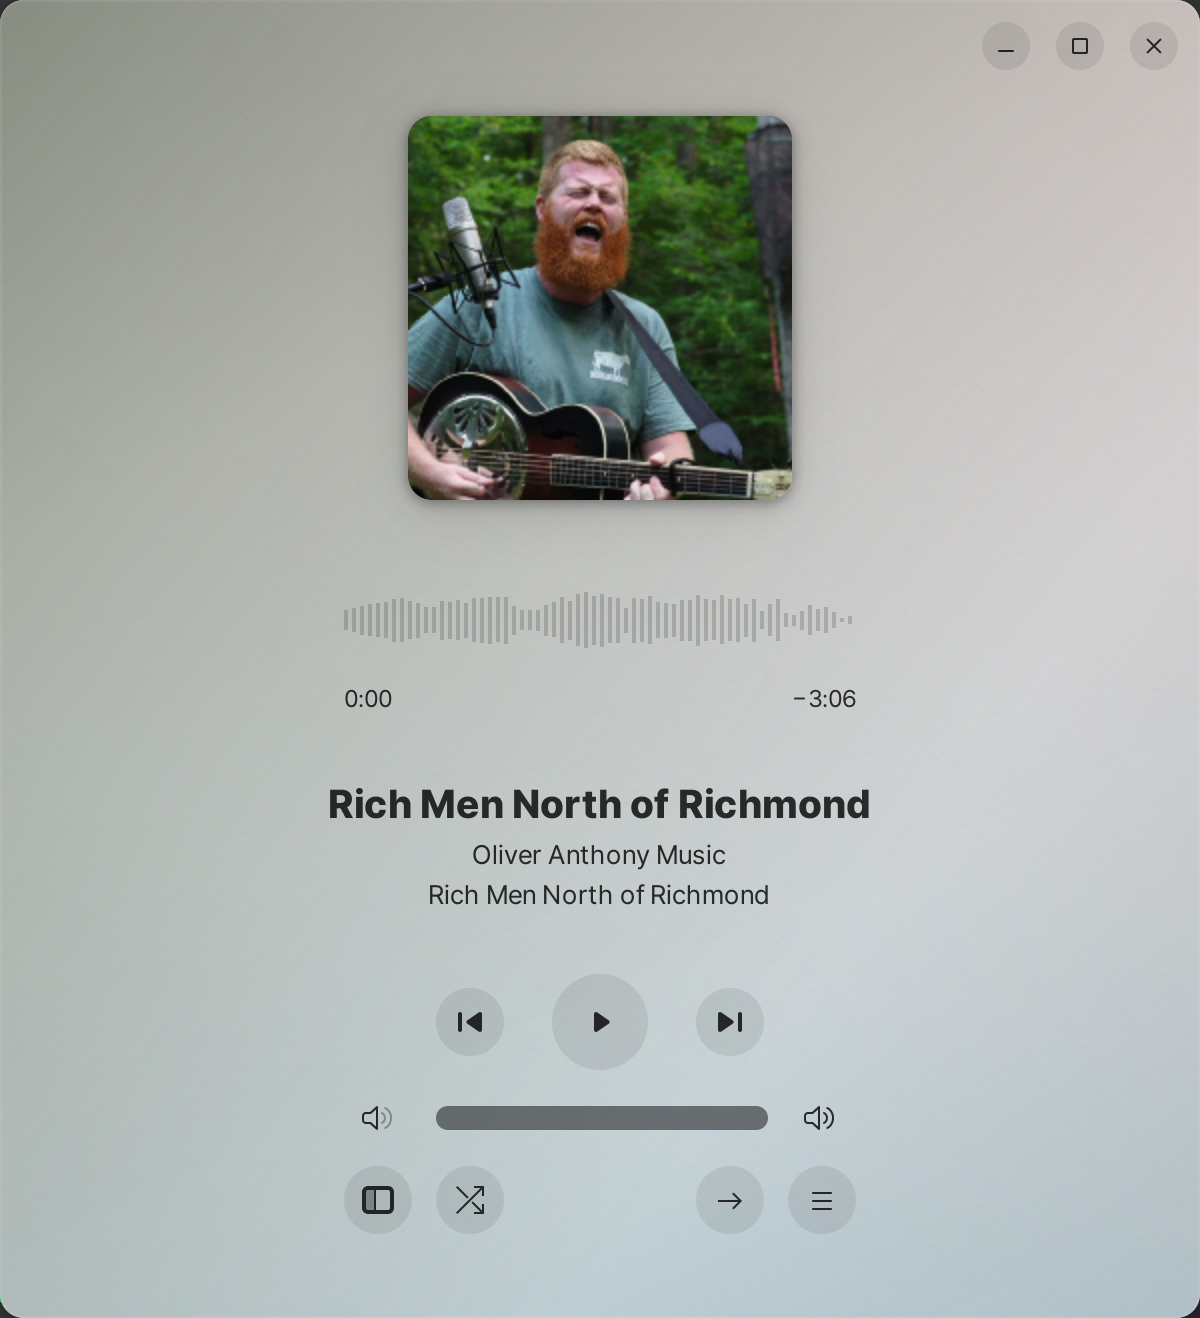 Oliver Anthony Music - Rich Men North of Richmond_001.png